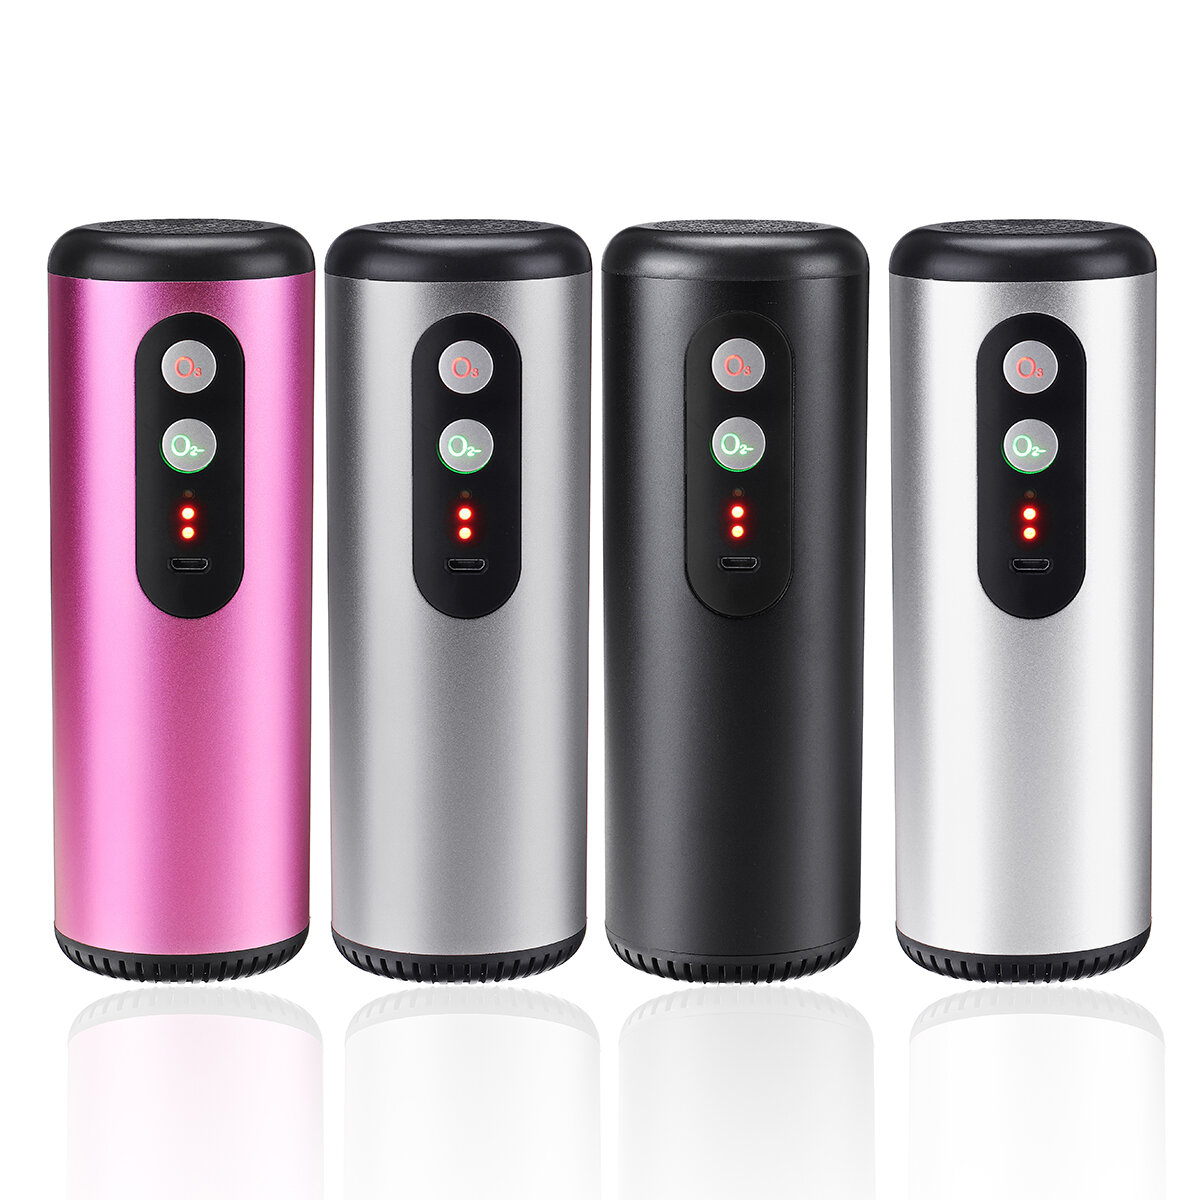 

5V Portable USB Cordless Dual Mode Air Purifier Ozone Generator for Car Home Prevention of PM2.5 Benzene Formaldehyde Ox